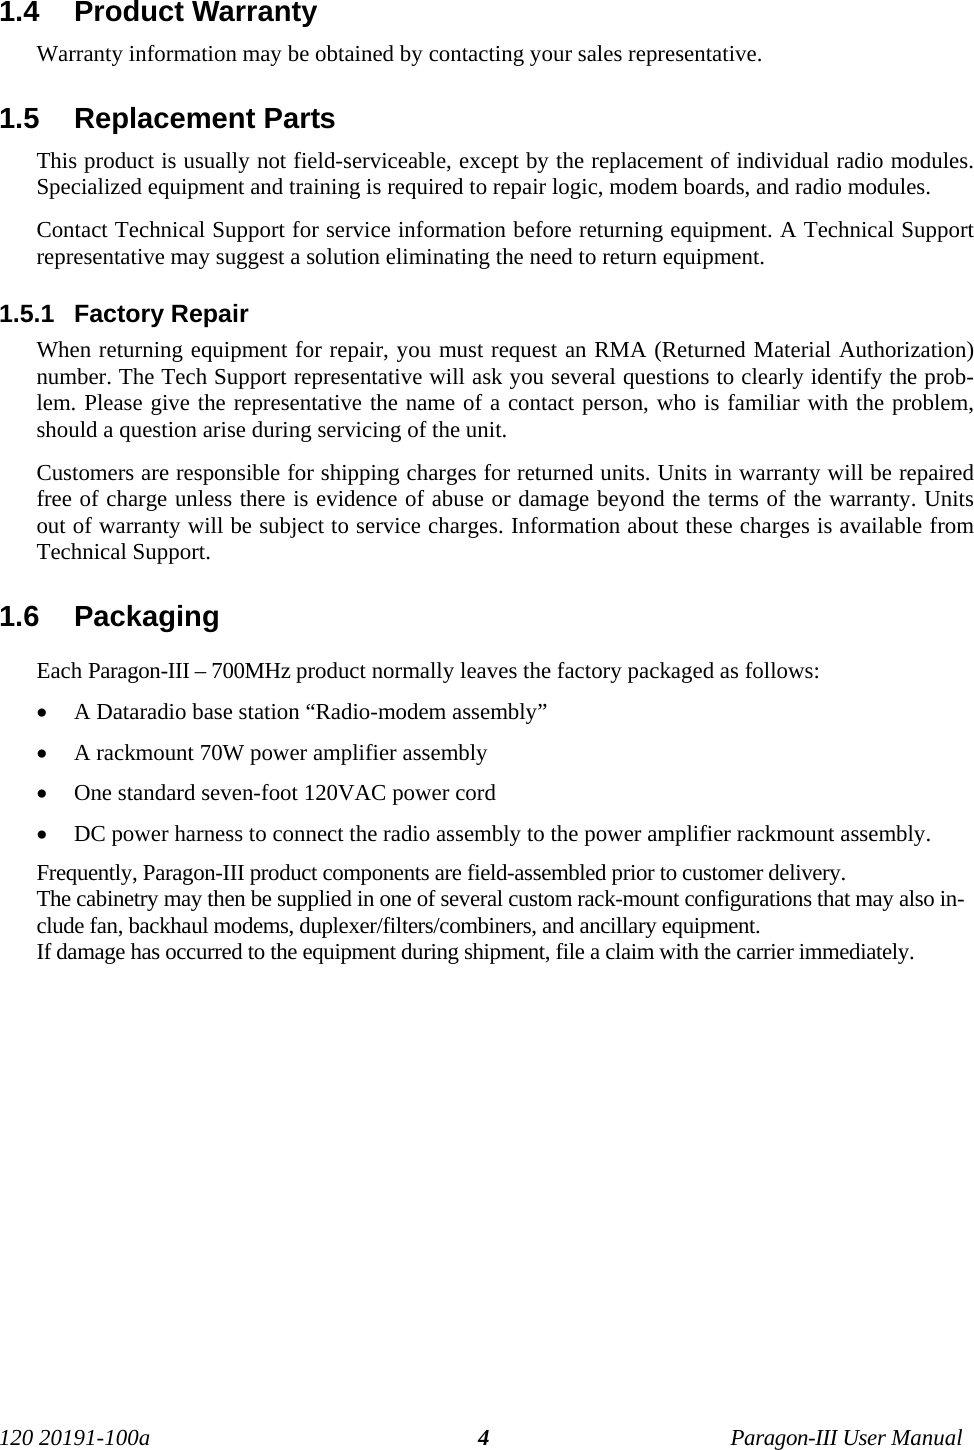 120 20191-100a Paragon-III User Manual41.4  Product Warranty Warranty information may be obtained by contacting your sales representative.1.5  Replacement Parts This product is usually not field-serviceable, except by the replacement of individual radio modules.Specialized equipment and training is required to repair logic, modem boards, and radio modules. Contact Technical Support for service information before returning equipment. A Technical Supportrepresentative may suggest a solution eliminating the need to return equipment.1.5.1  Factory Repair When returning equipment for repair, you must request an RMA (Returned Material Authorization)number. The Tech Support representative will ask you several questions to clearly identify the prob-lem. Please give the representative the name of a contact person, who is familiar with the problem,should a question arise during servicing of the unit. Customers are responsible for shipping charges for returned units. Units in warranty will be repairedfree of charge unless there is evidence of abuse or damage beyond the terms of the warranty. Unitsout of warranty will be subject to service charges. Information about these charges is available fromTechnical Support.1.6  PackagingEach Paragon-III – 700MHz product normally leaves the factory packaged as follows:• A Dataradio base station “Radio-modem assembly” • A rackmount 70W power amplifier assembly• One standard seven-foot 120VAC power cord • DC power harness to connect the radio assembly to the power amplifier rackmount assembly. Frequently, Paragon-III product components are field-assembled prior to customer delivery. The cabinetry may then be supplied in one of several custom rack-mount configurations that may also in-clude fan, backhaul modems, duplexer/filters/combiners, and ancillary equipment. If damage has occurred to the equipment during shipment, file a claim with the carrier immediately.